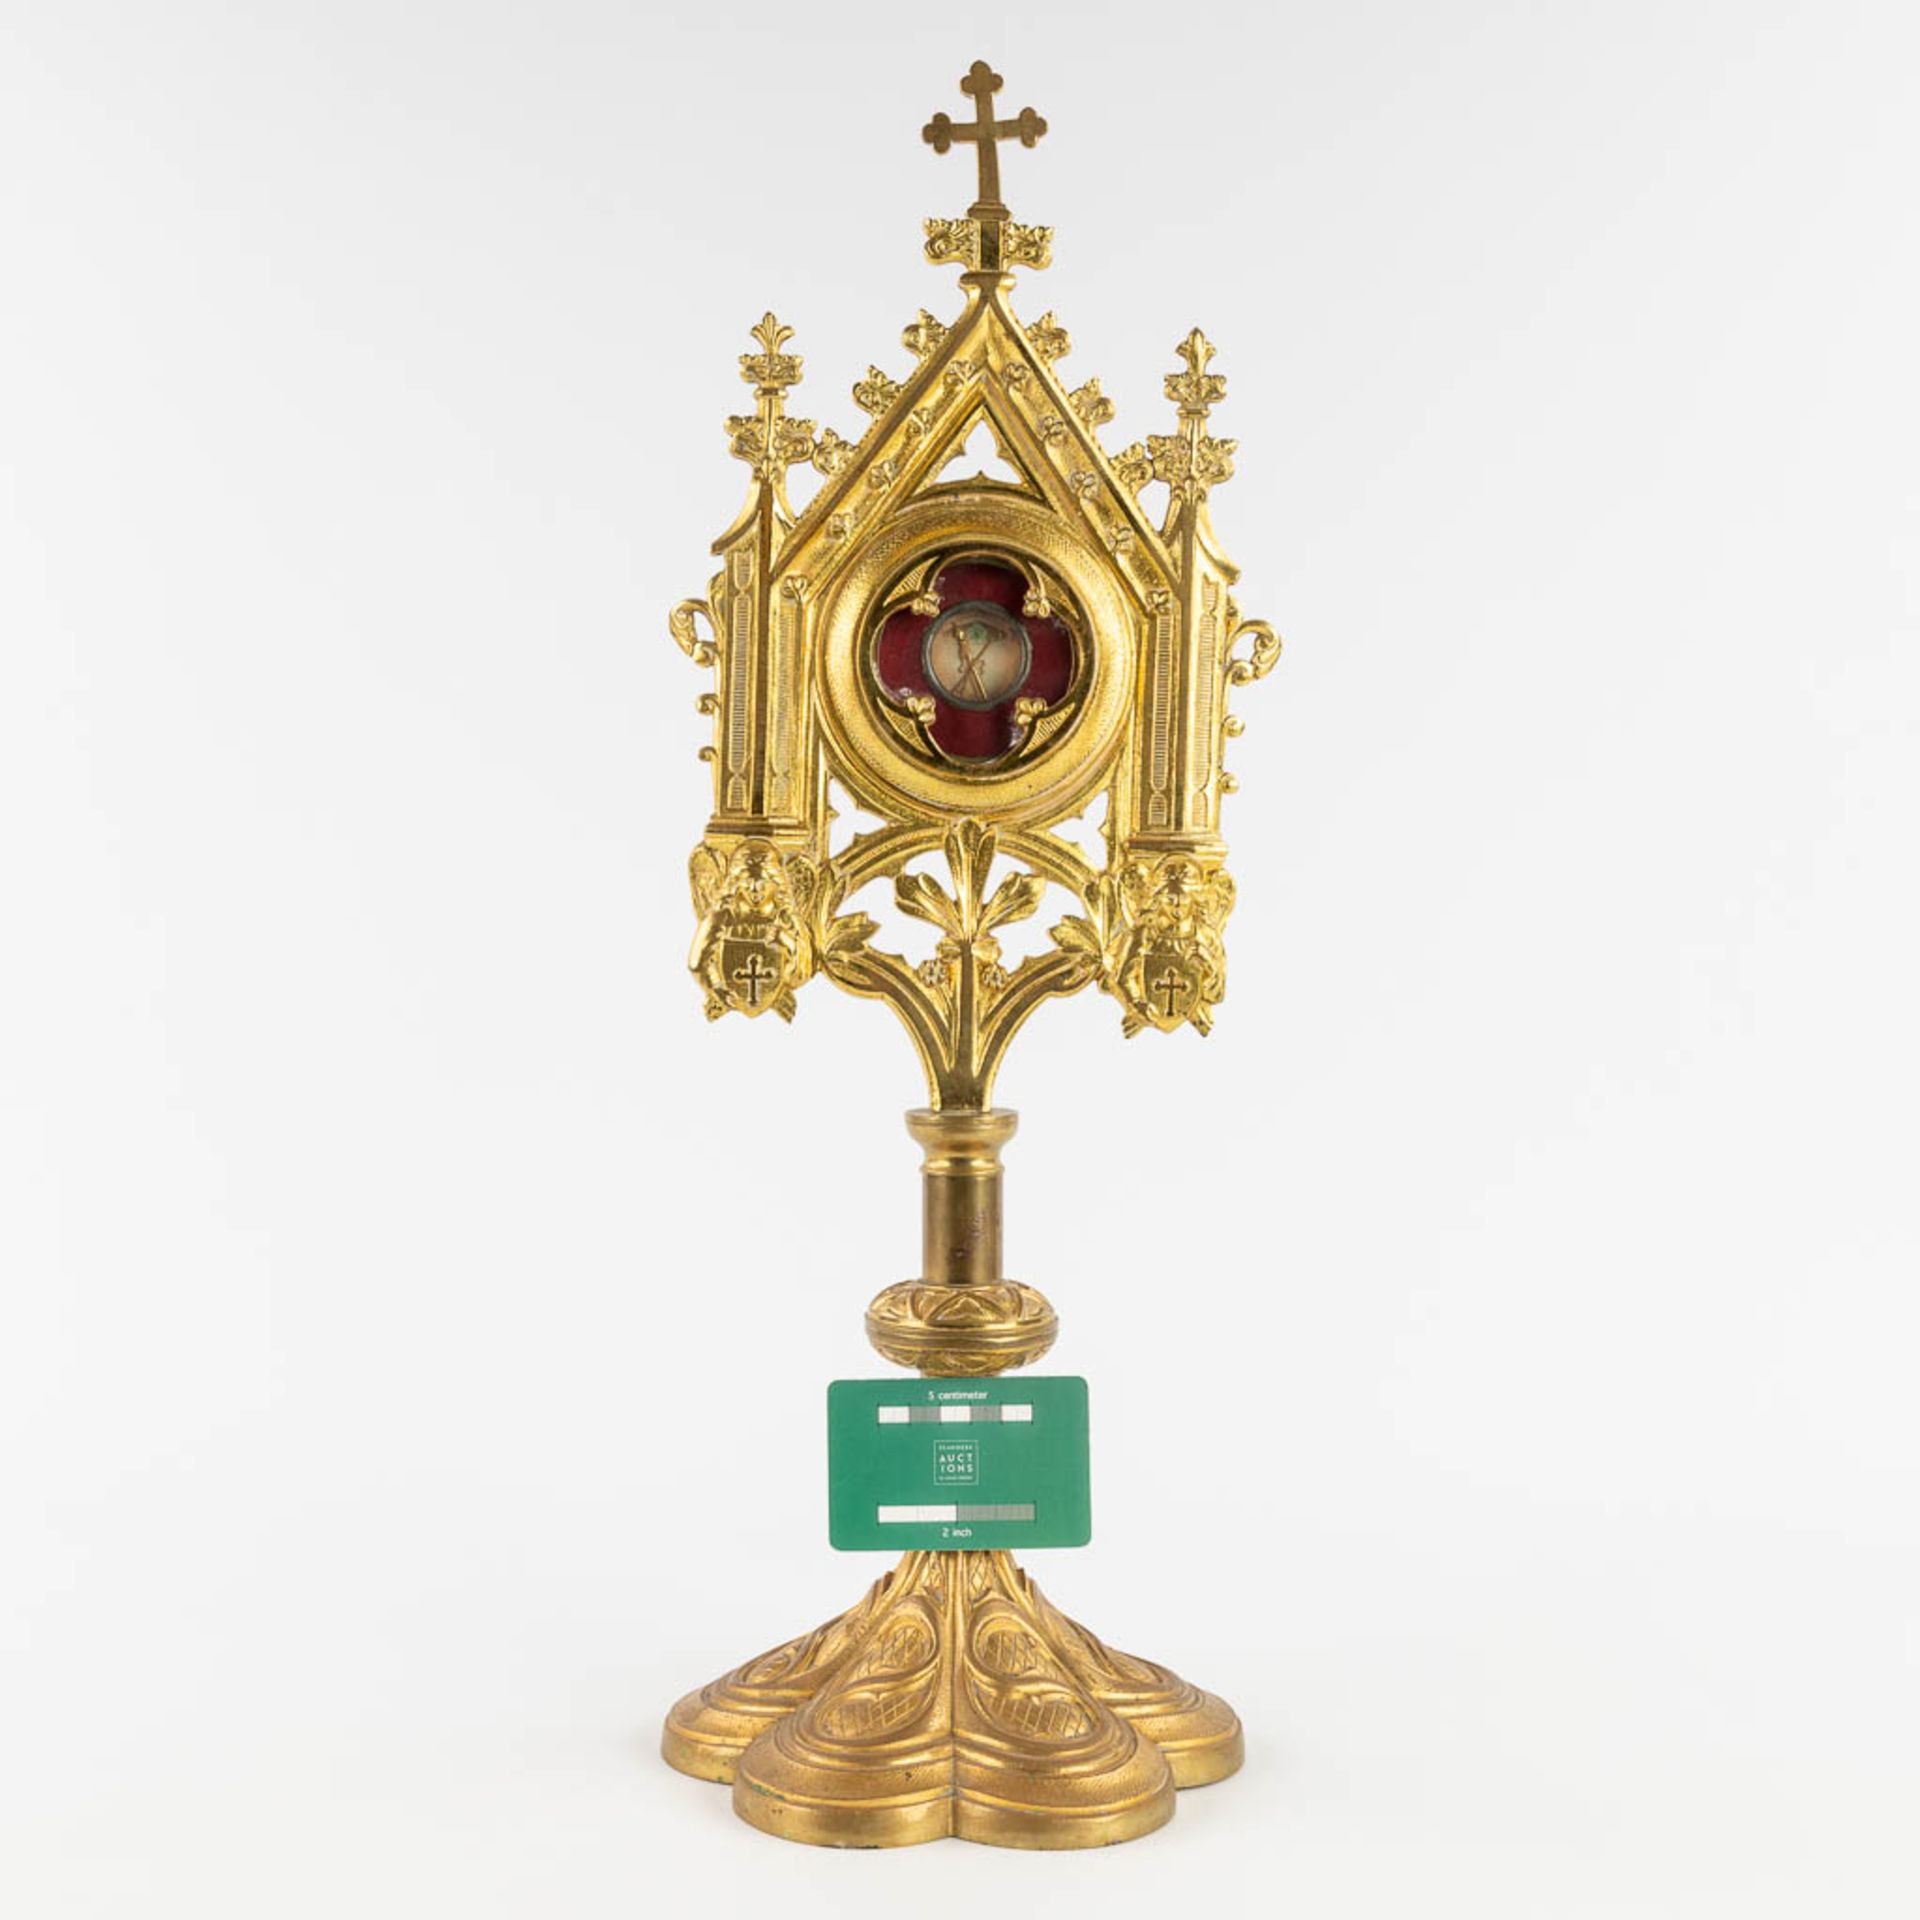 A sealed theca with relic 'De Spongia DNJC' in a bronze monstrance in a gothic revival style. 1858. - Image 2 of 17